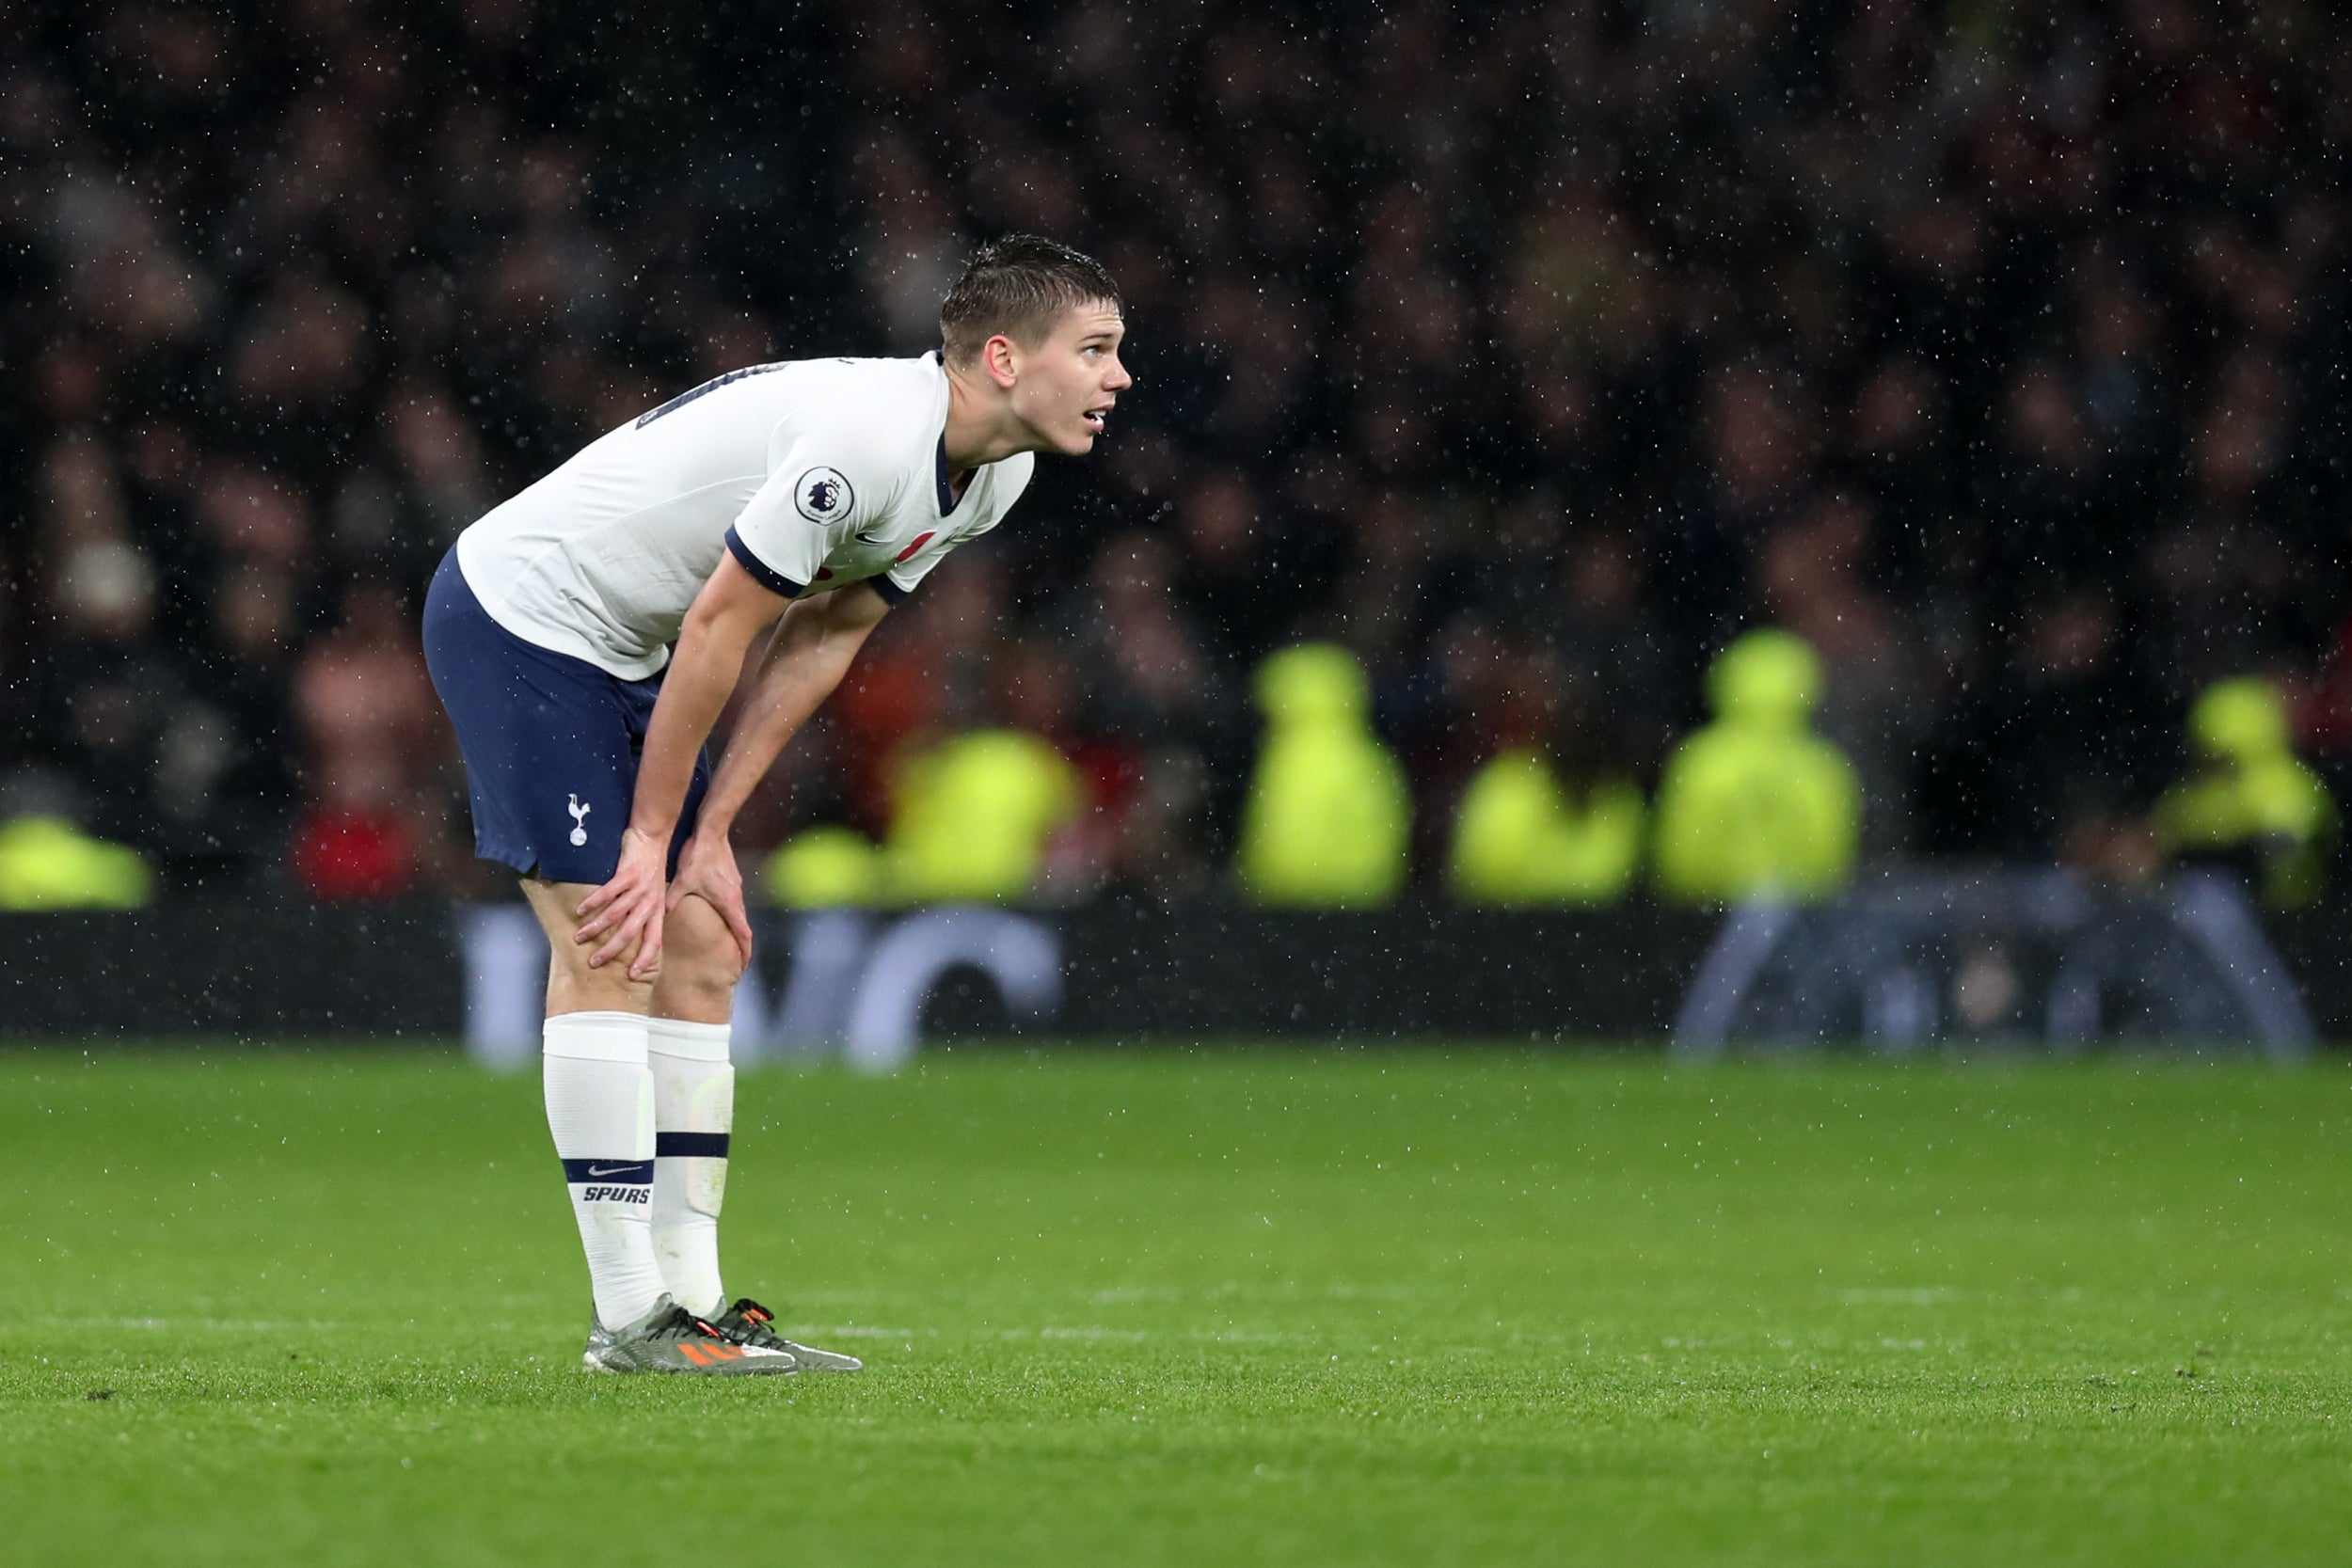 Juan Foyth moved to Spurs from Estudiantes in 2017